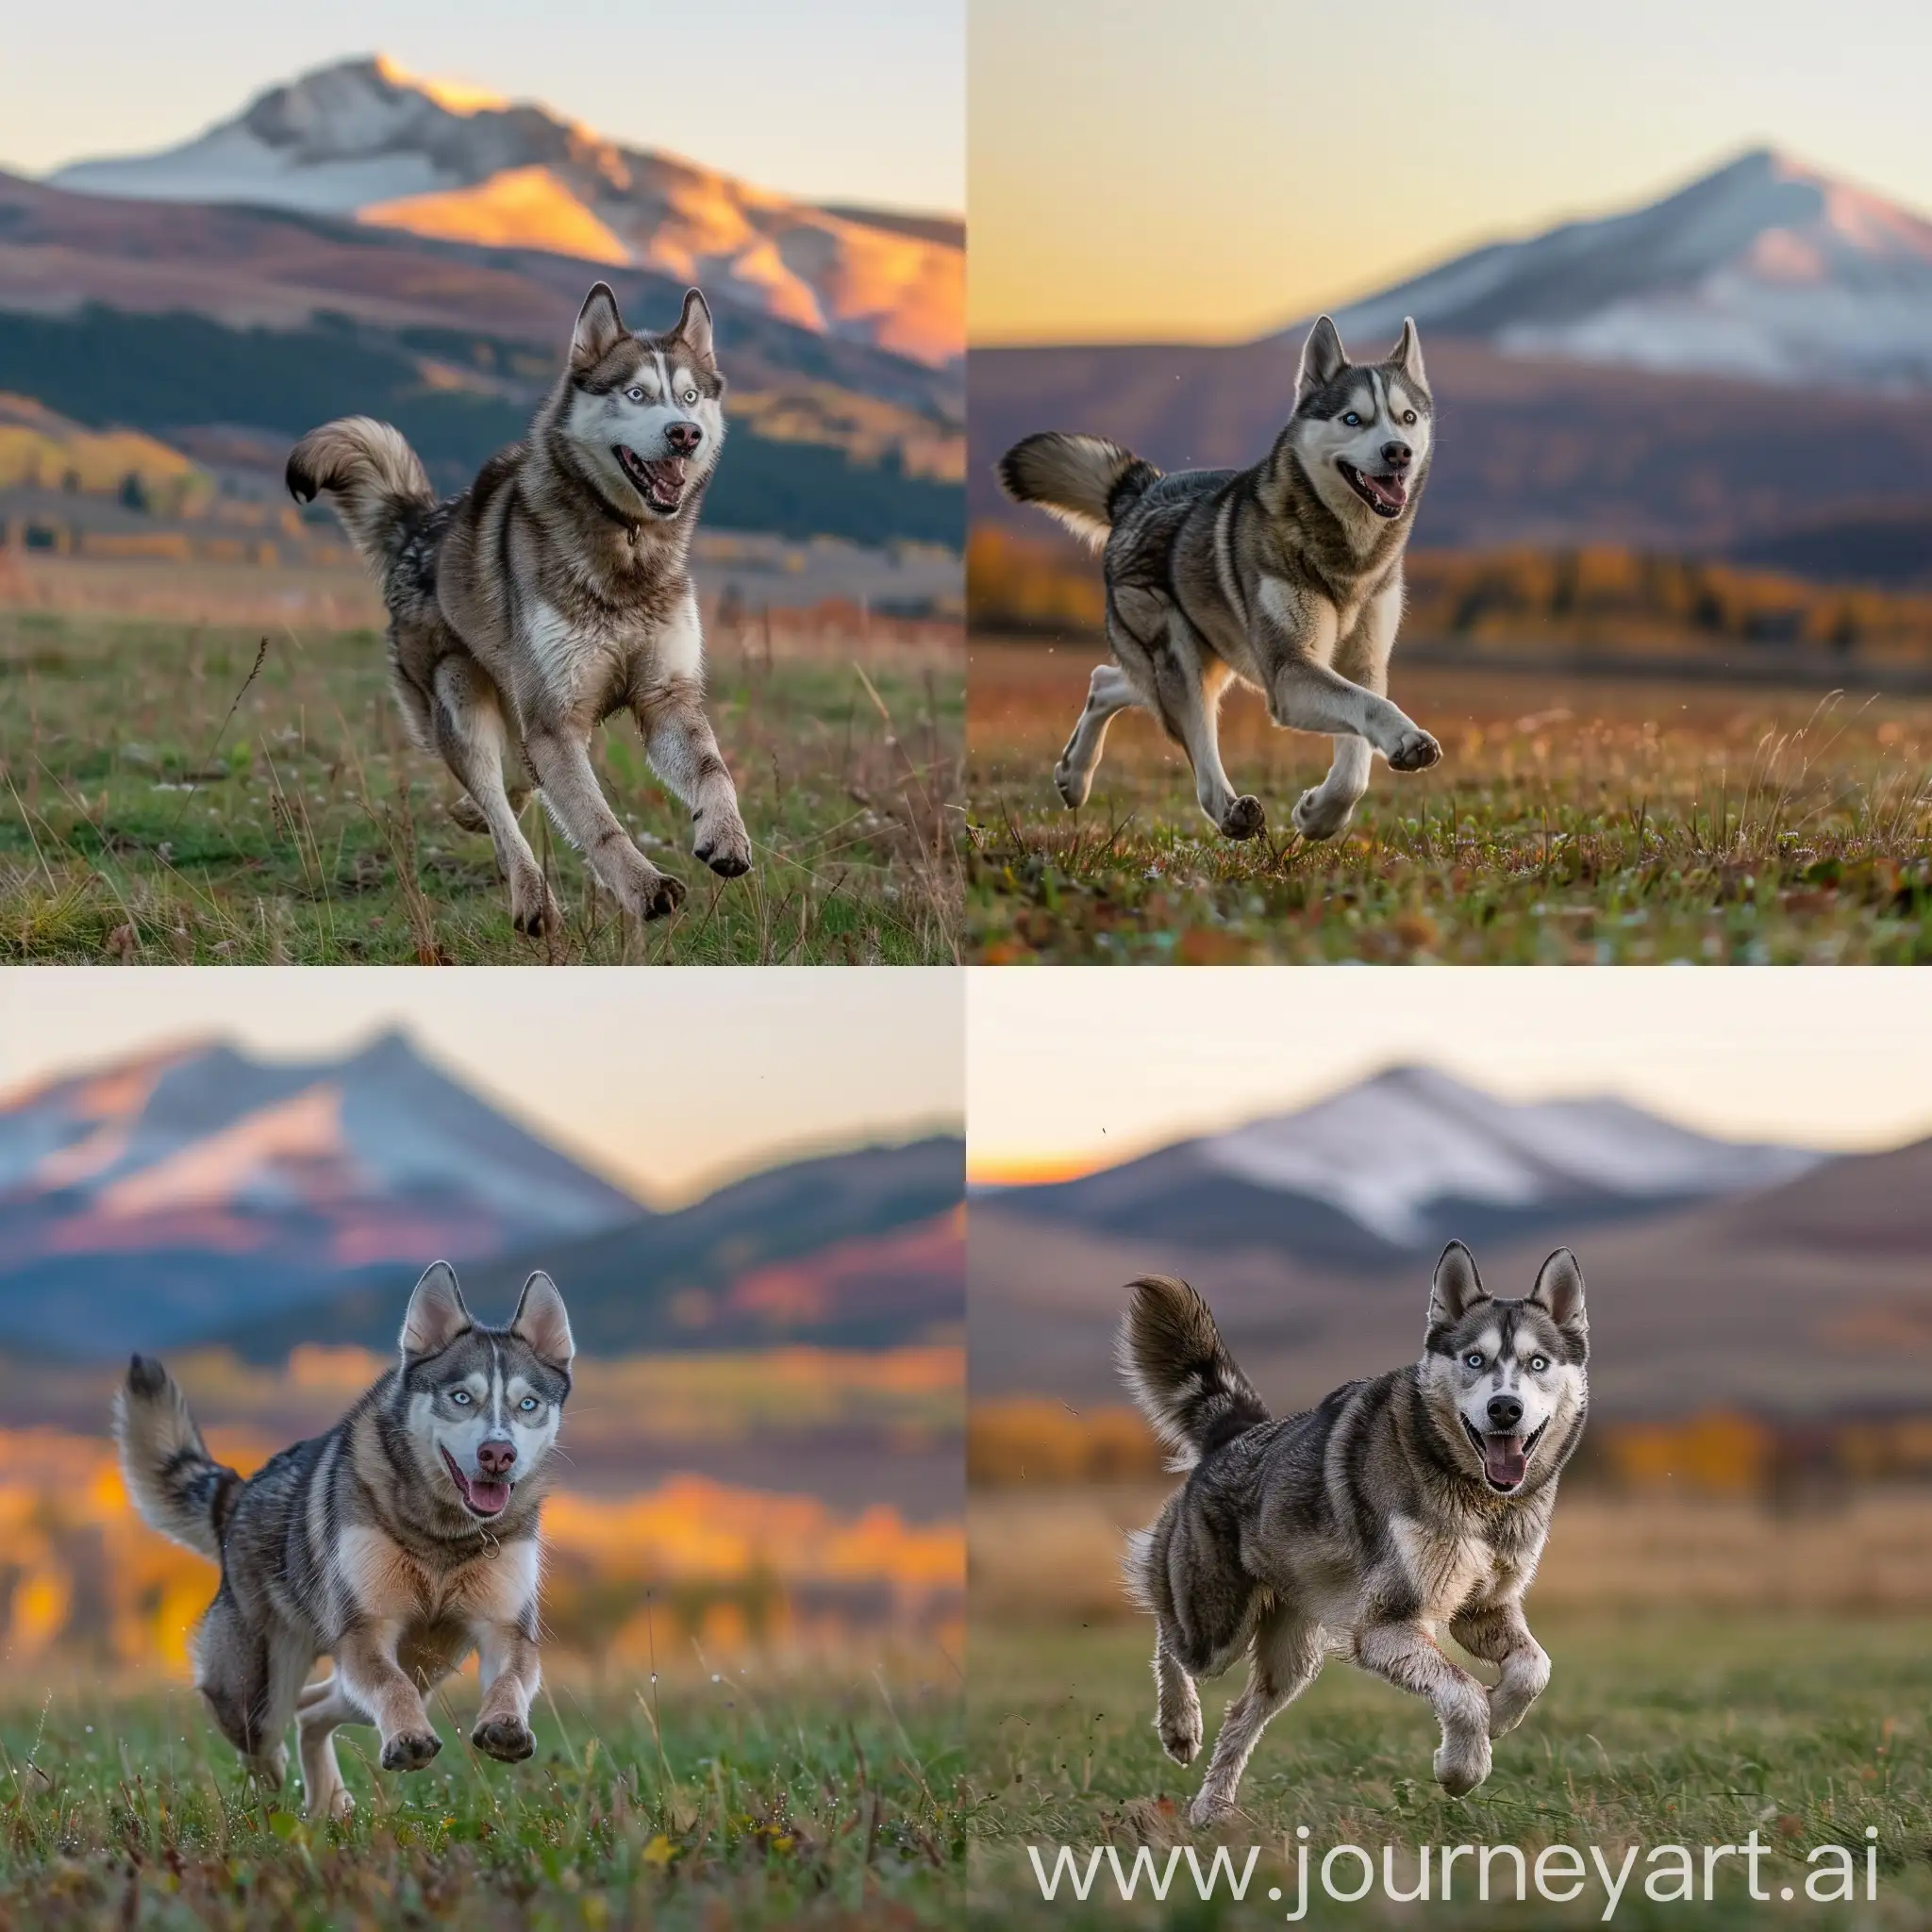 Energetic-Husky-Dog-Running-Through-Autumn-Fields-with-Mountain-Backdrop